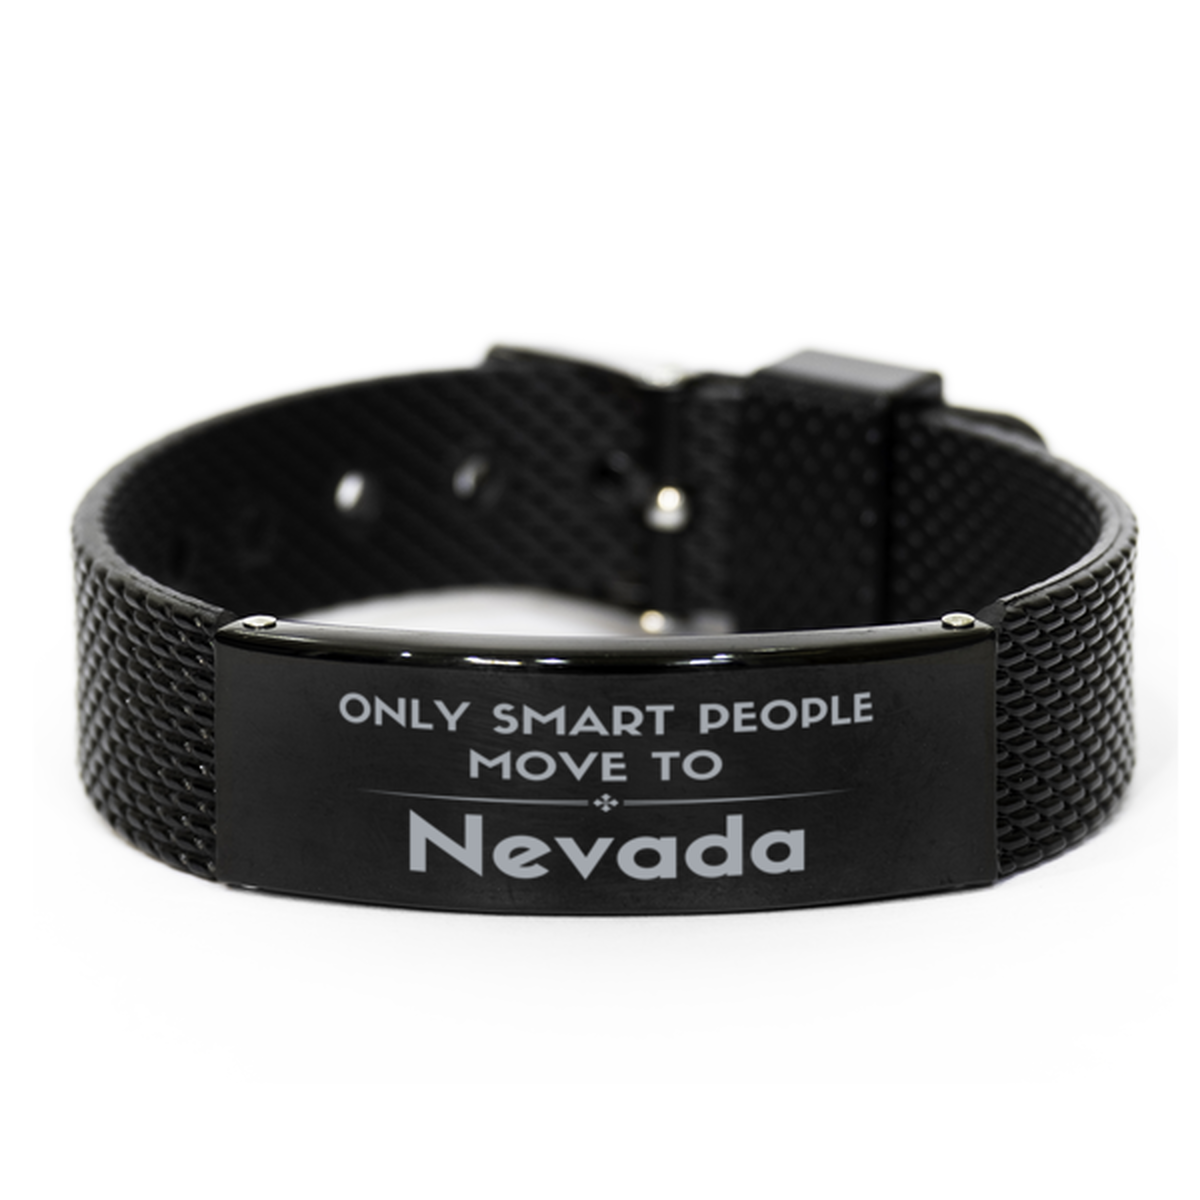 Only smart people move to Nevada Black Shark Mesh Bracelet, Gag Gifts For Nevada, Move to Nevada Gifts for Friends Coworker Funny Saying Quote